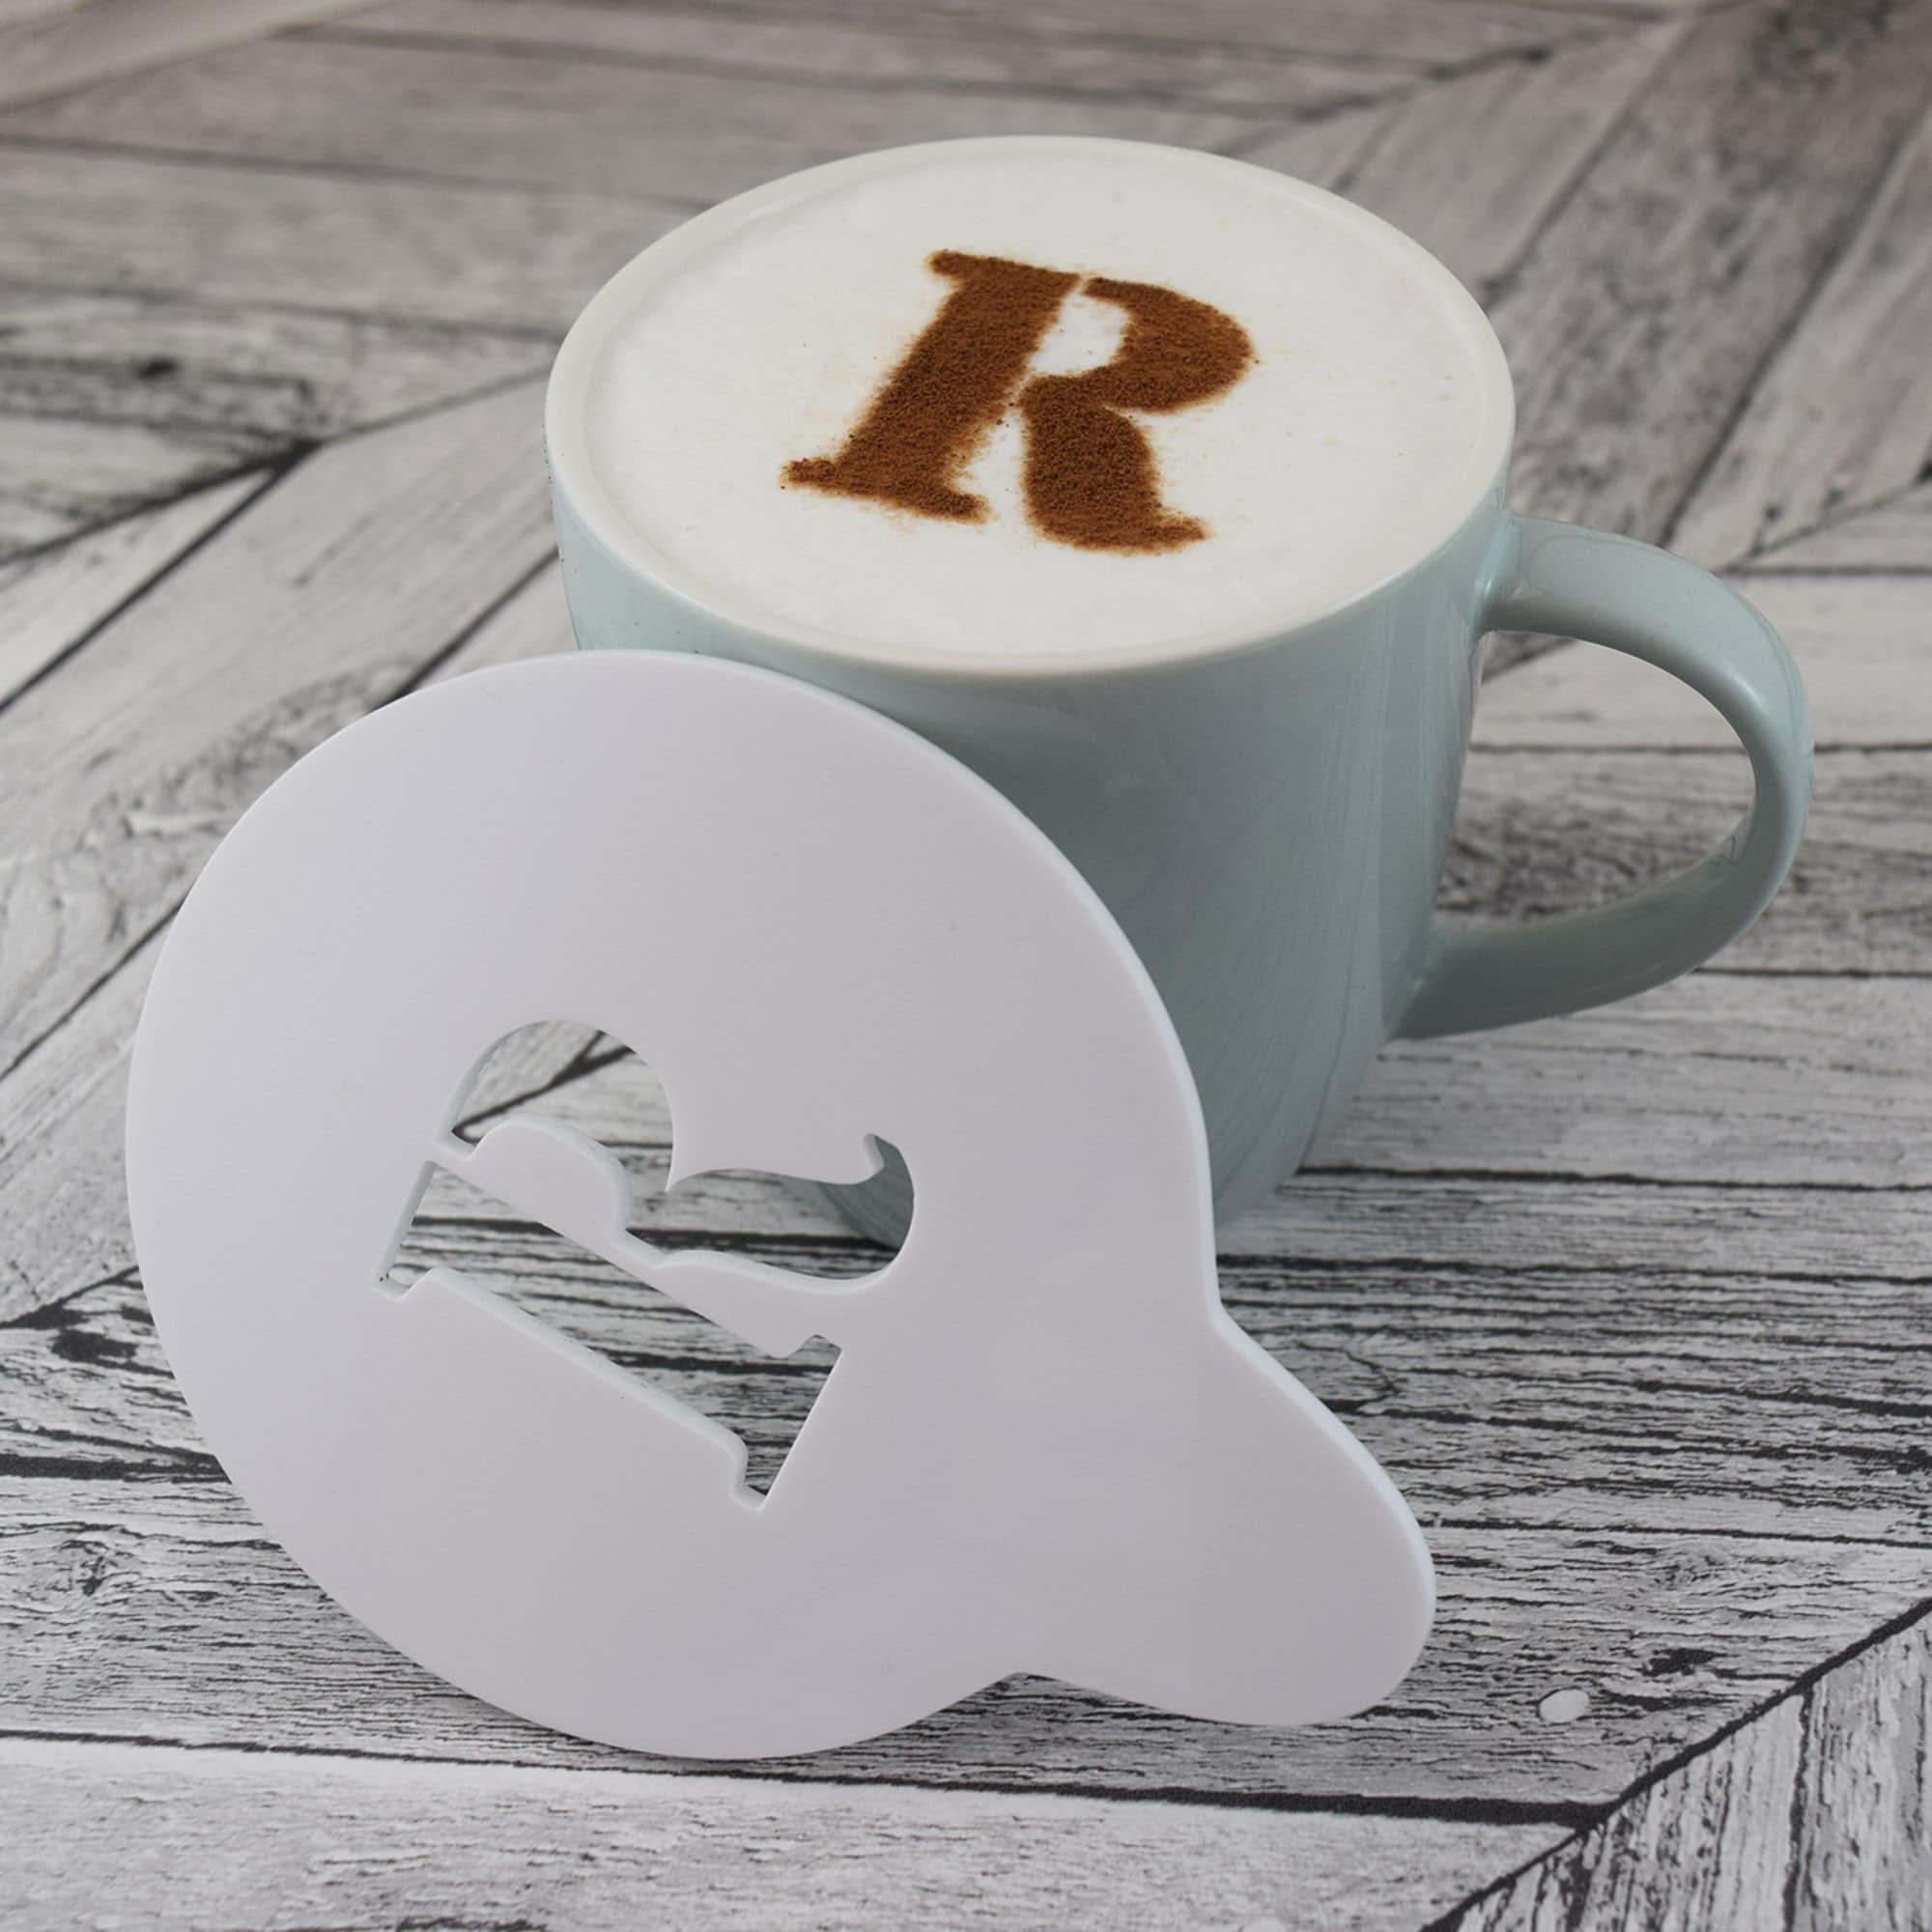 Electrical Coffee Stencils  For Latte Art, Cake, Spice Decoration,  Carving, Baking, And Pastry Kitchen Tool Set RRC607 From B2b_beautiful,  $2.69